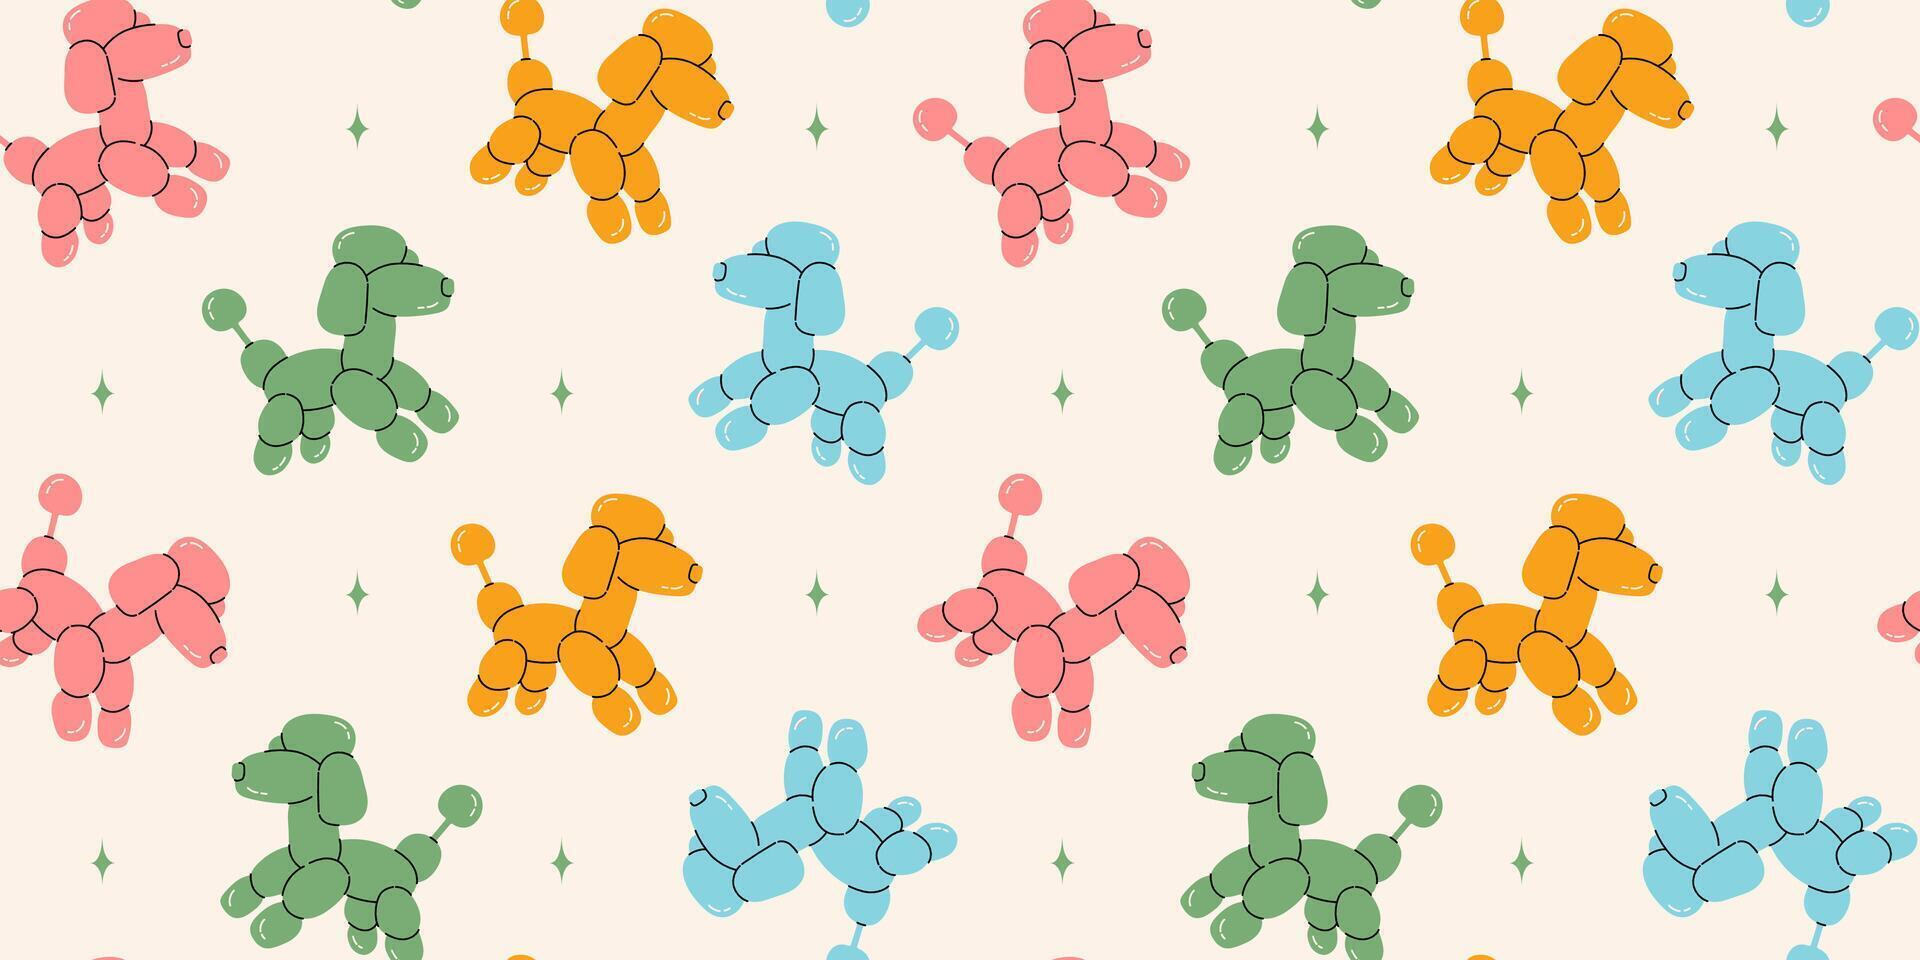 Seamless pattern with dog balloons. Bright colorful repeating elements. Stock illustration. Vector seamless pattern of cute cartoon bubble animal in color.